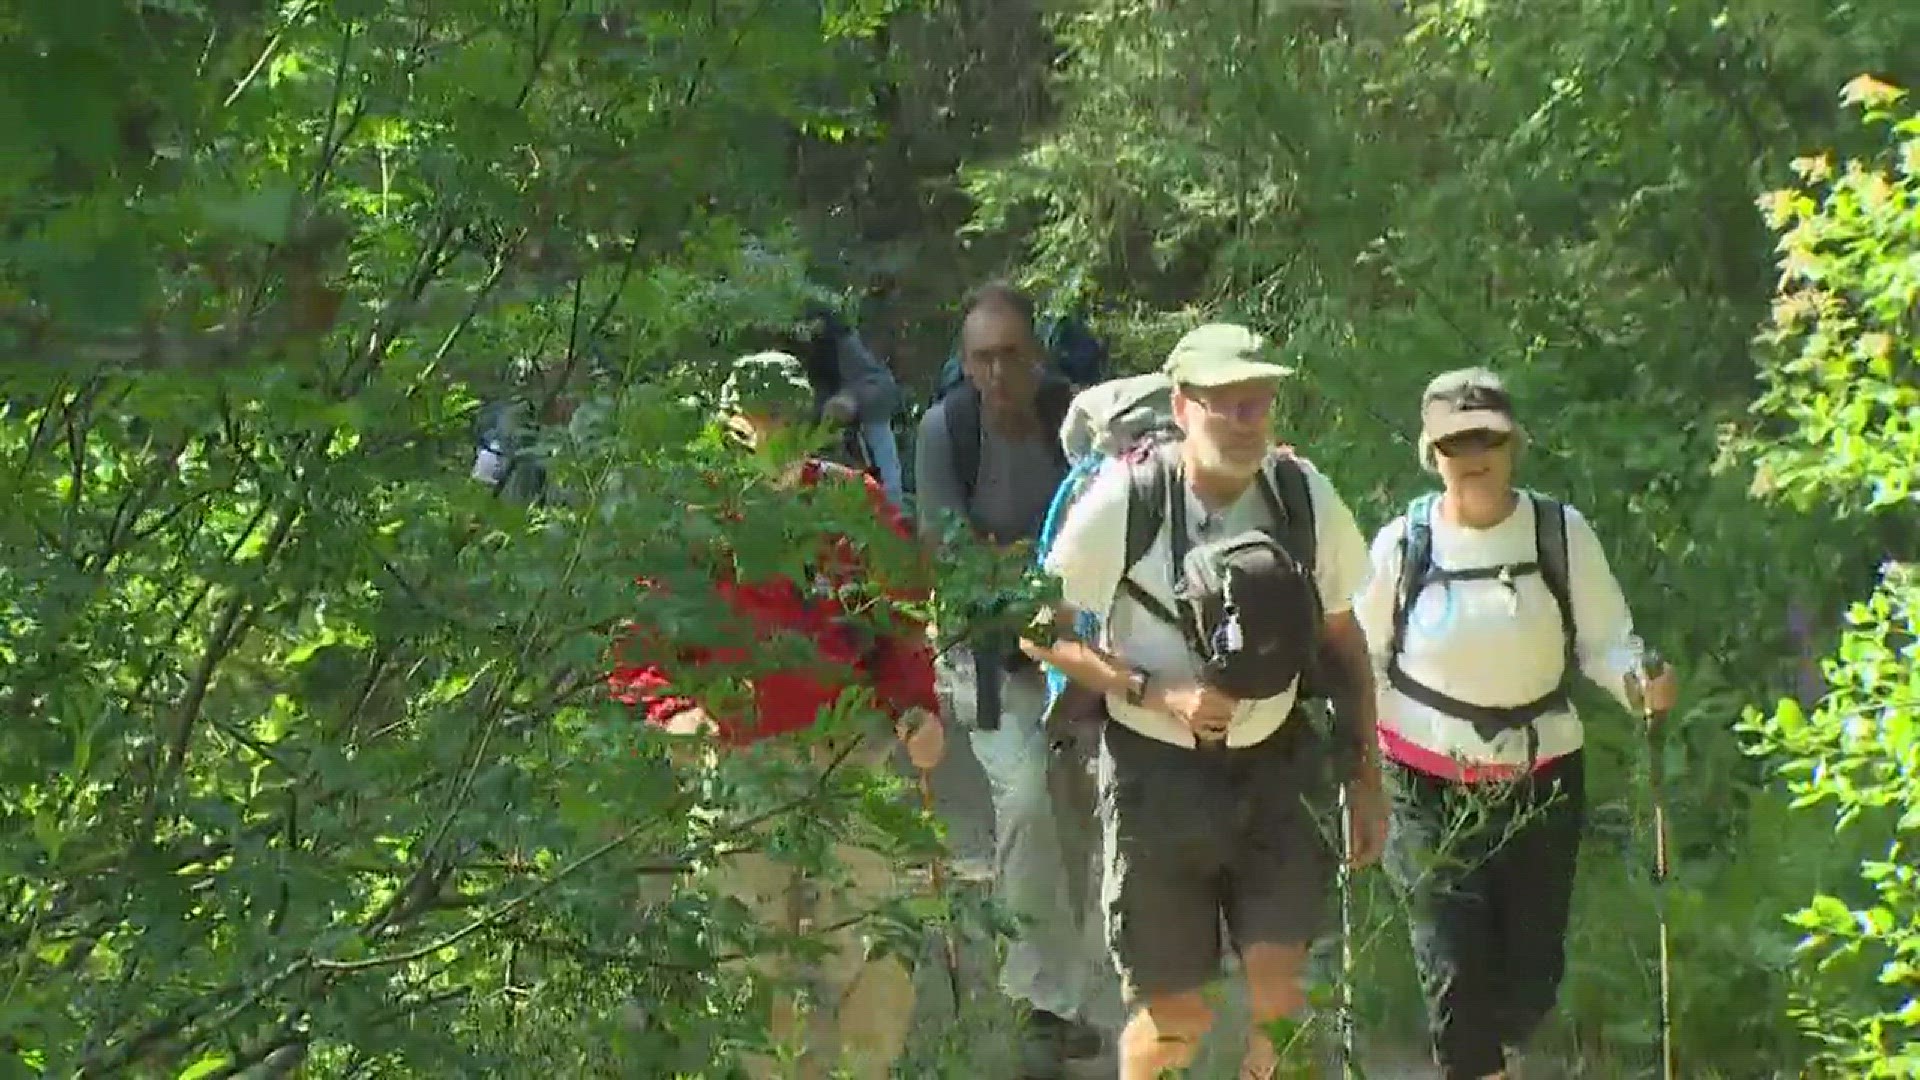 Five people with Parkinson's disease are embarking on a 72-mile journey on the Pacific Crest Trail.